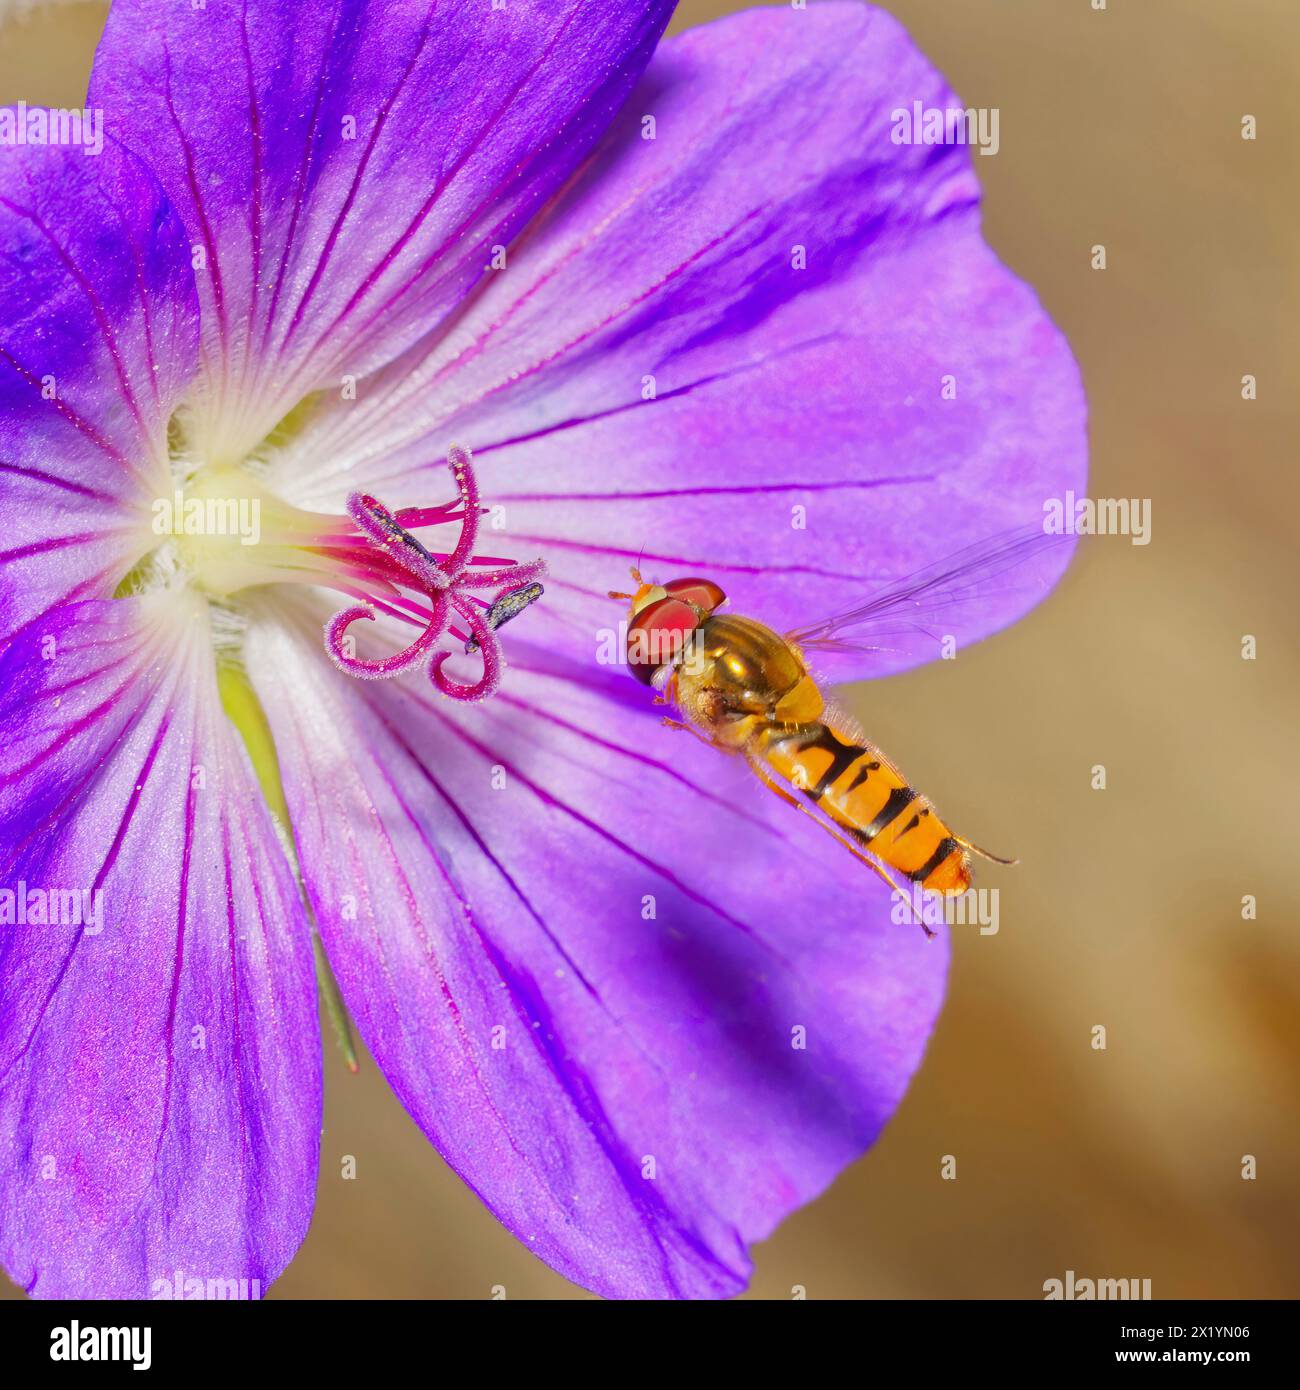 Hoverfly delicately approaches purple geranium, showcasing nature's beauty and intricate details Stock Photo